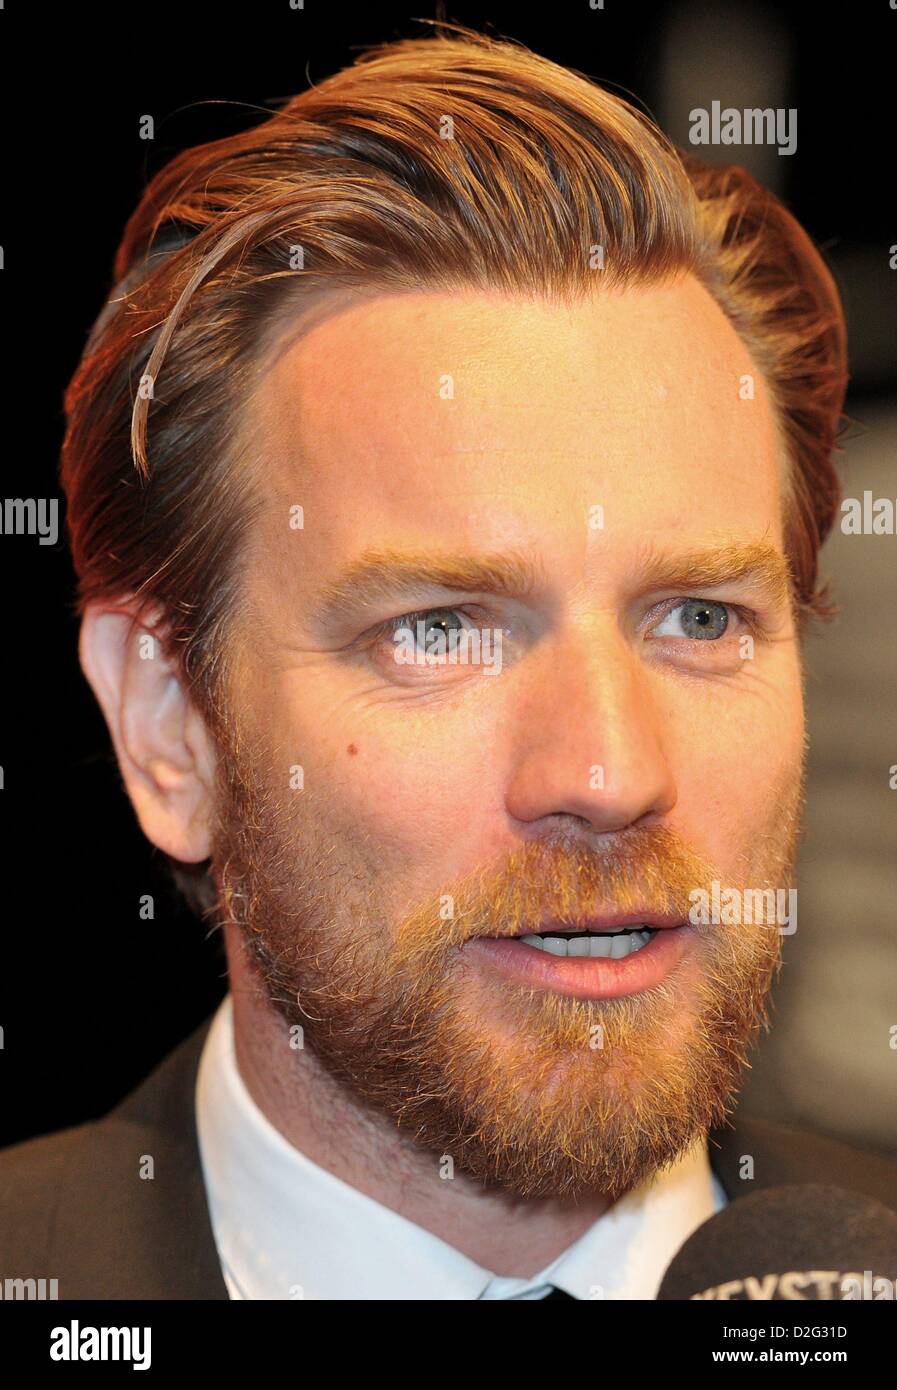 Geneva, Switzerland. 22nd January 2013. Scottish Actor Ewan Mc Gregor attends at IWC Race Night Dinner in Geneva.The swiss watch manufactur celebrated its new Ingenieur collection as well as the partnershipwith the Mercedes AMG Petronas Formula One Team. Photo: Frank May/picture alliance/ Alamy Live News Stock Photo